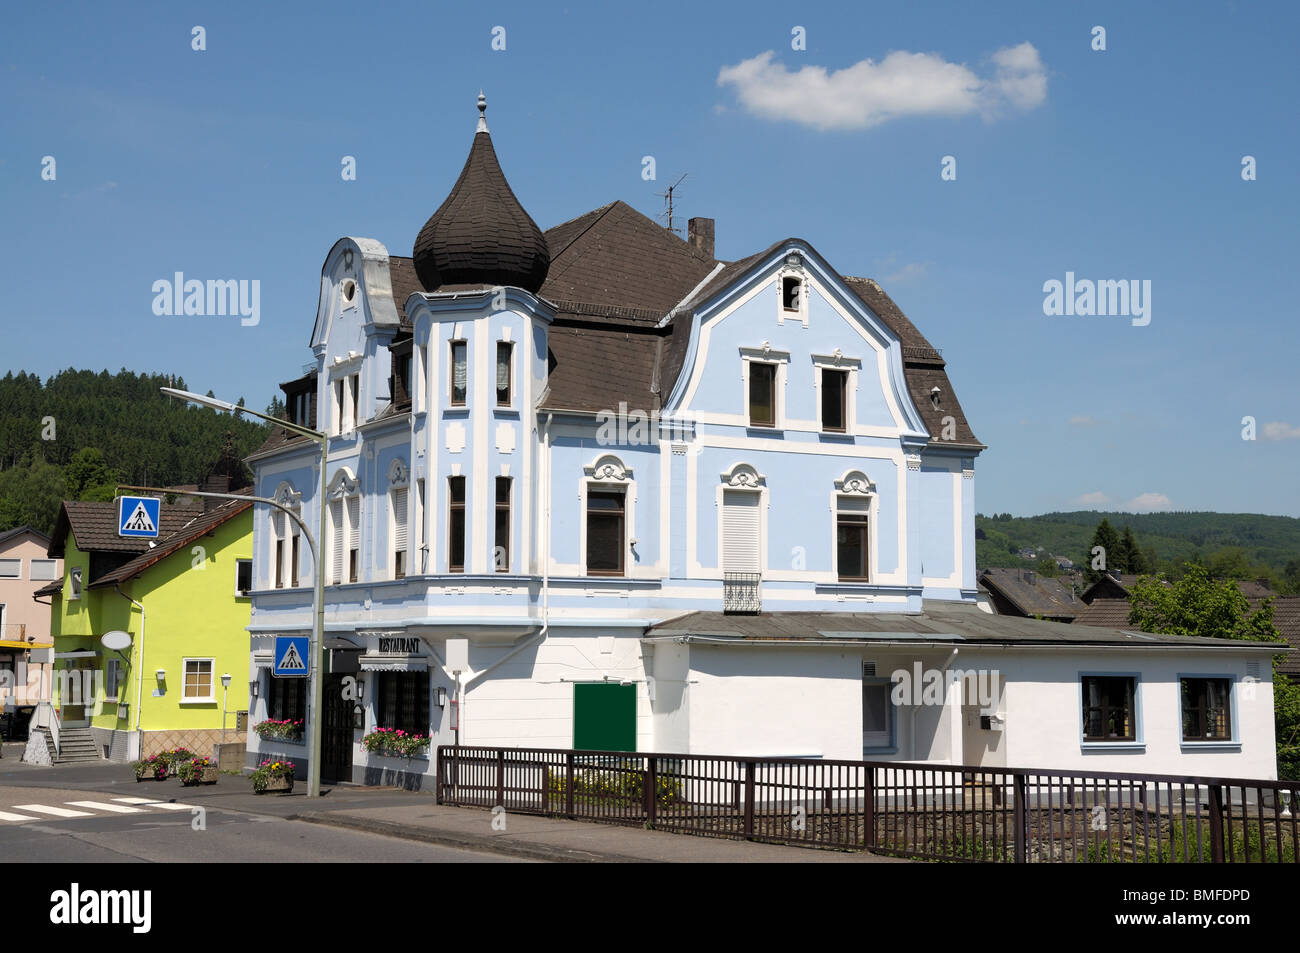 Old house in town Kirchen, North Rhine-Westphalia, Germany Stock Photo